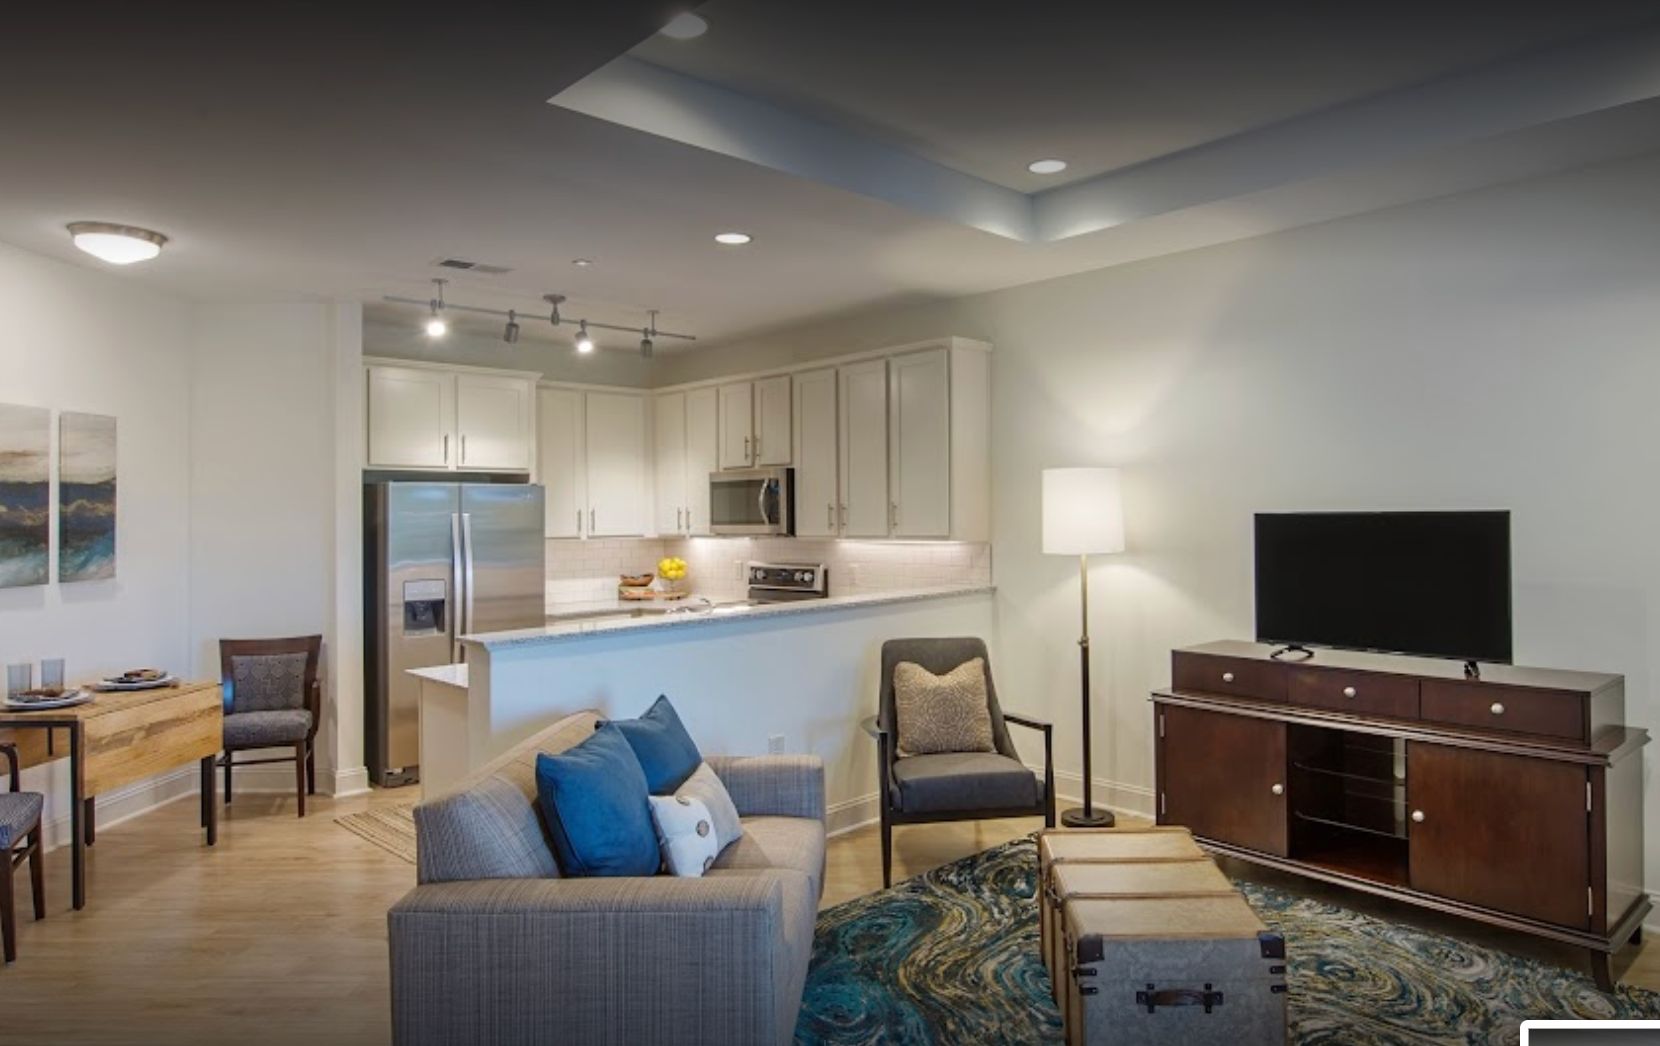 Interior view of Somerby Franklin senior living room with modern decor and appliances.